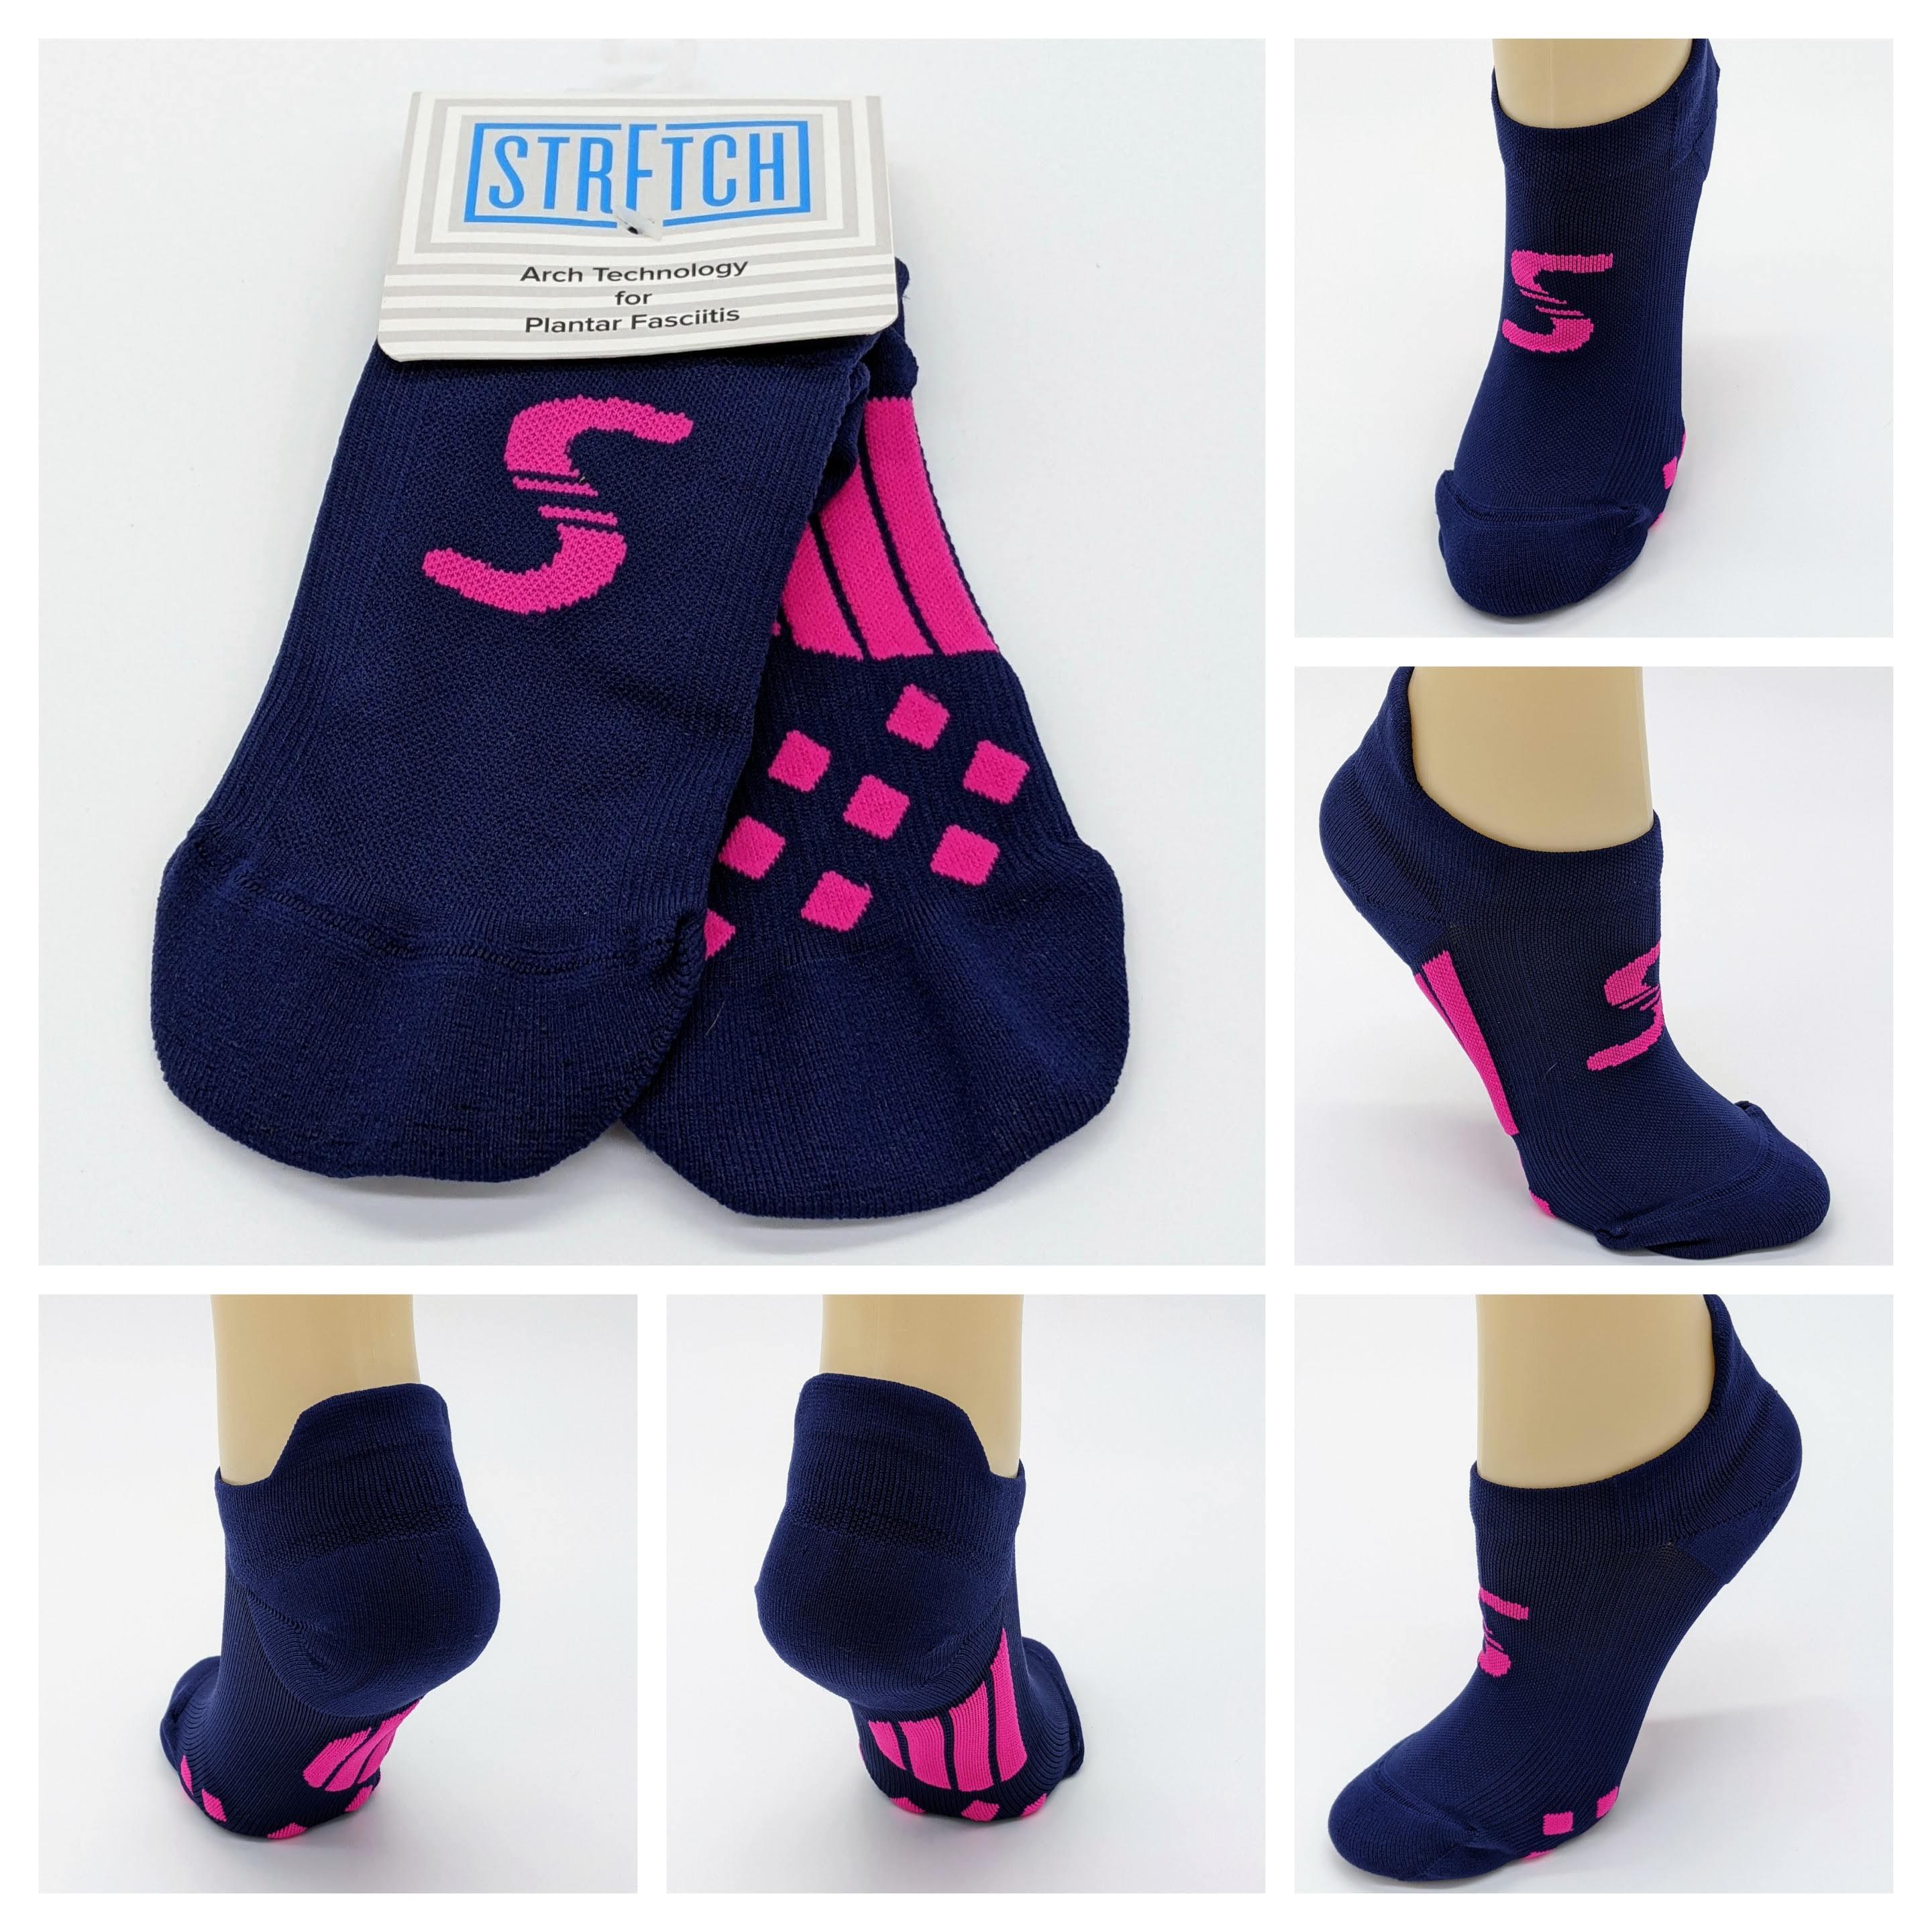 Shop 7 Compression & Plantar Fasciitis Socks products at Supply Physical  Therapy ⭐ Shop Compression & Plantar Fasciitis Socks Now 👉